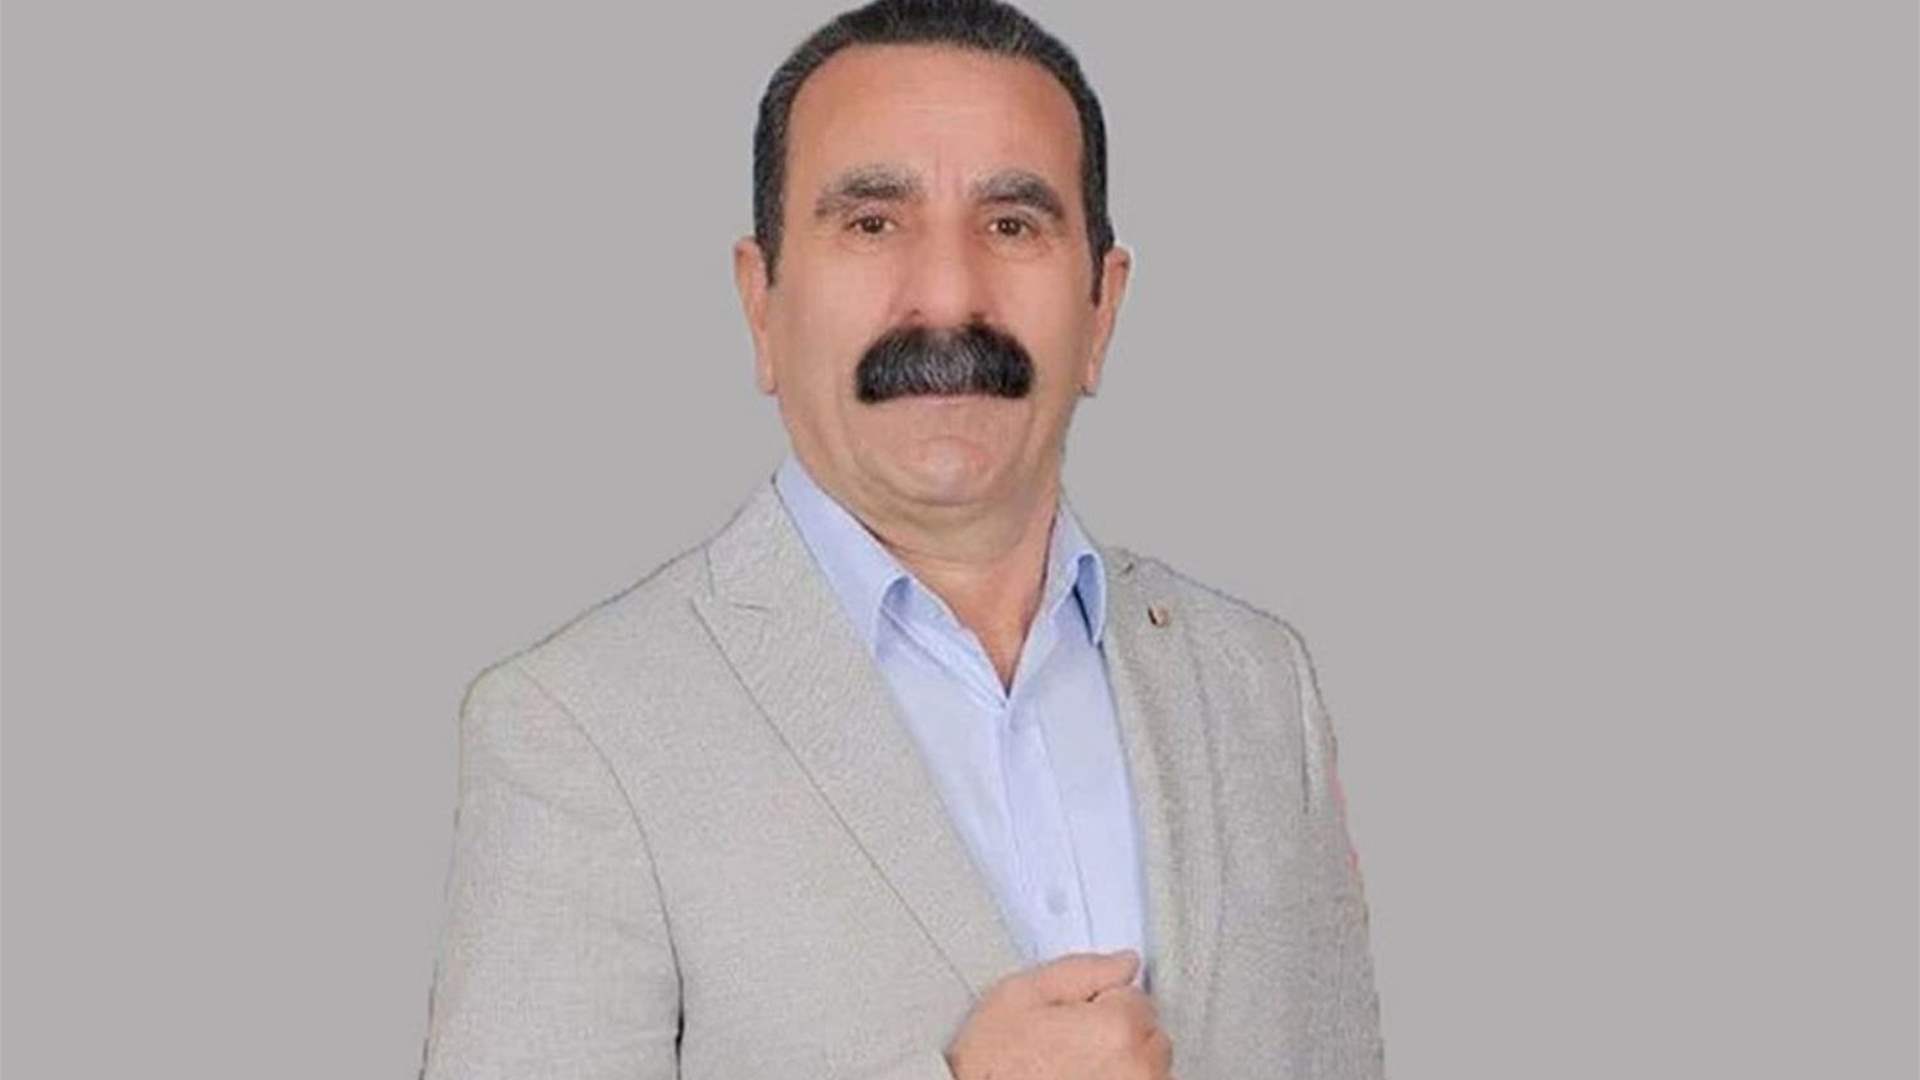 Turkey sentences Kurdish-supporting mayor to over 19 years in prison on &quot;terrorism&quot; charges